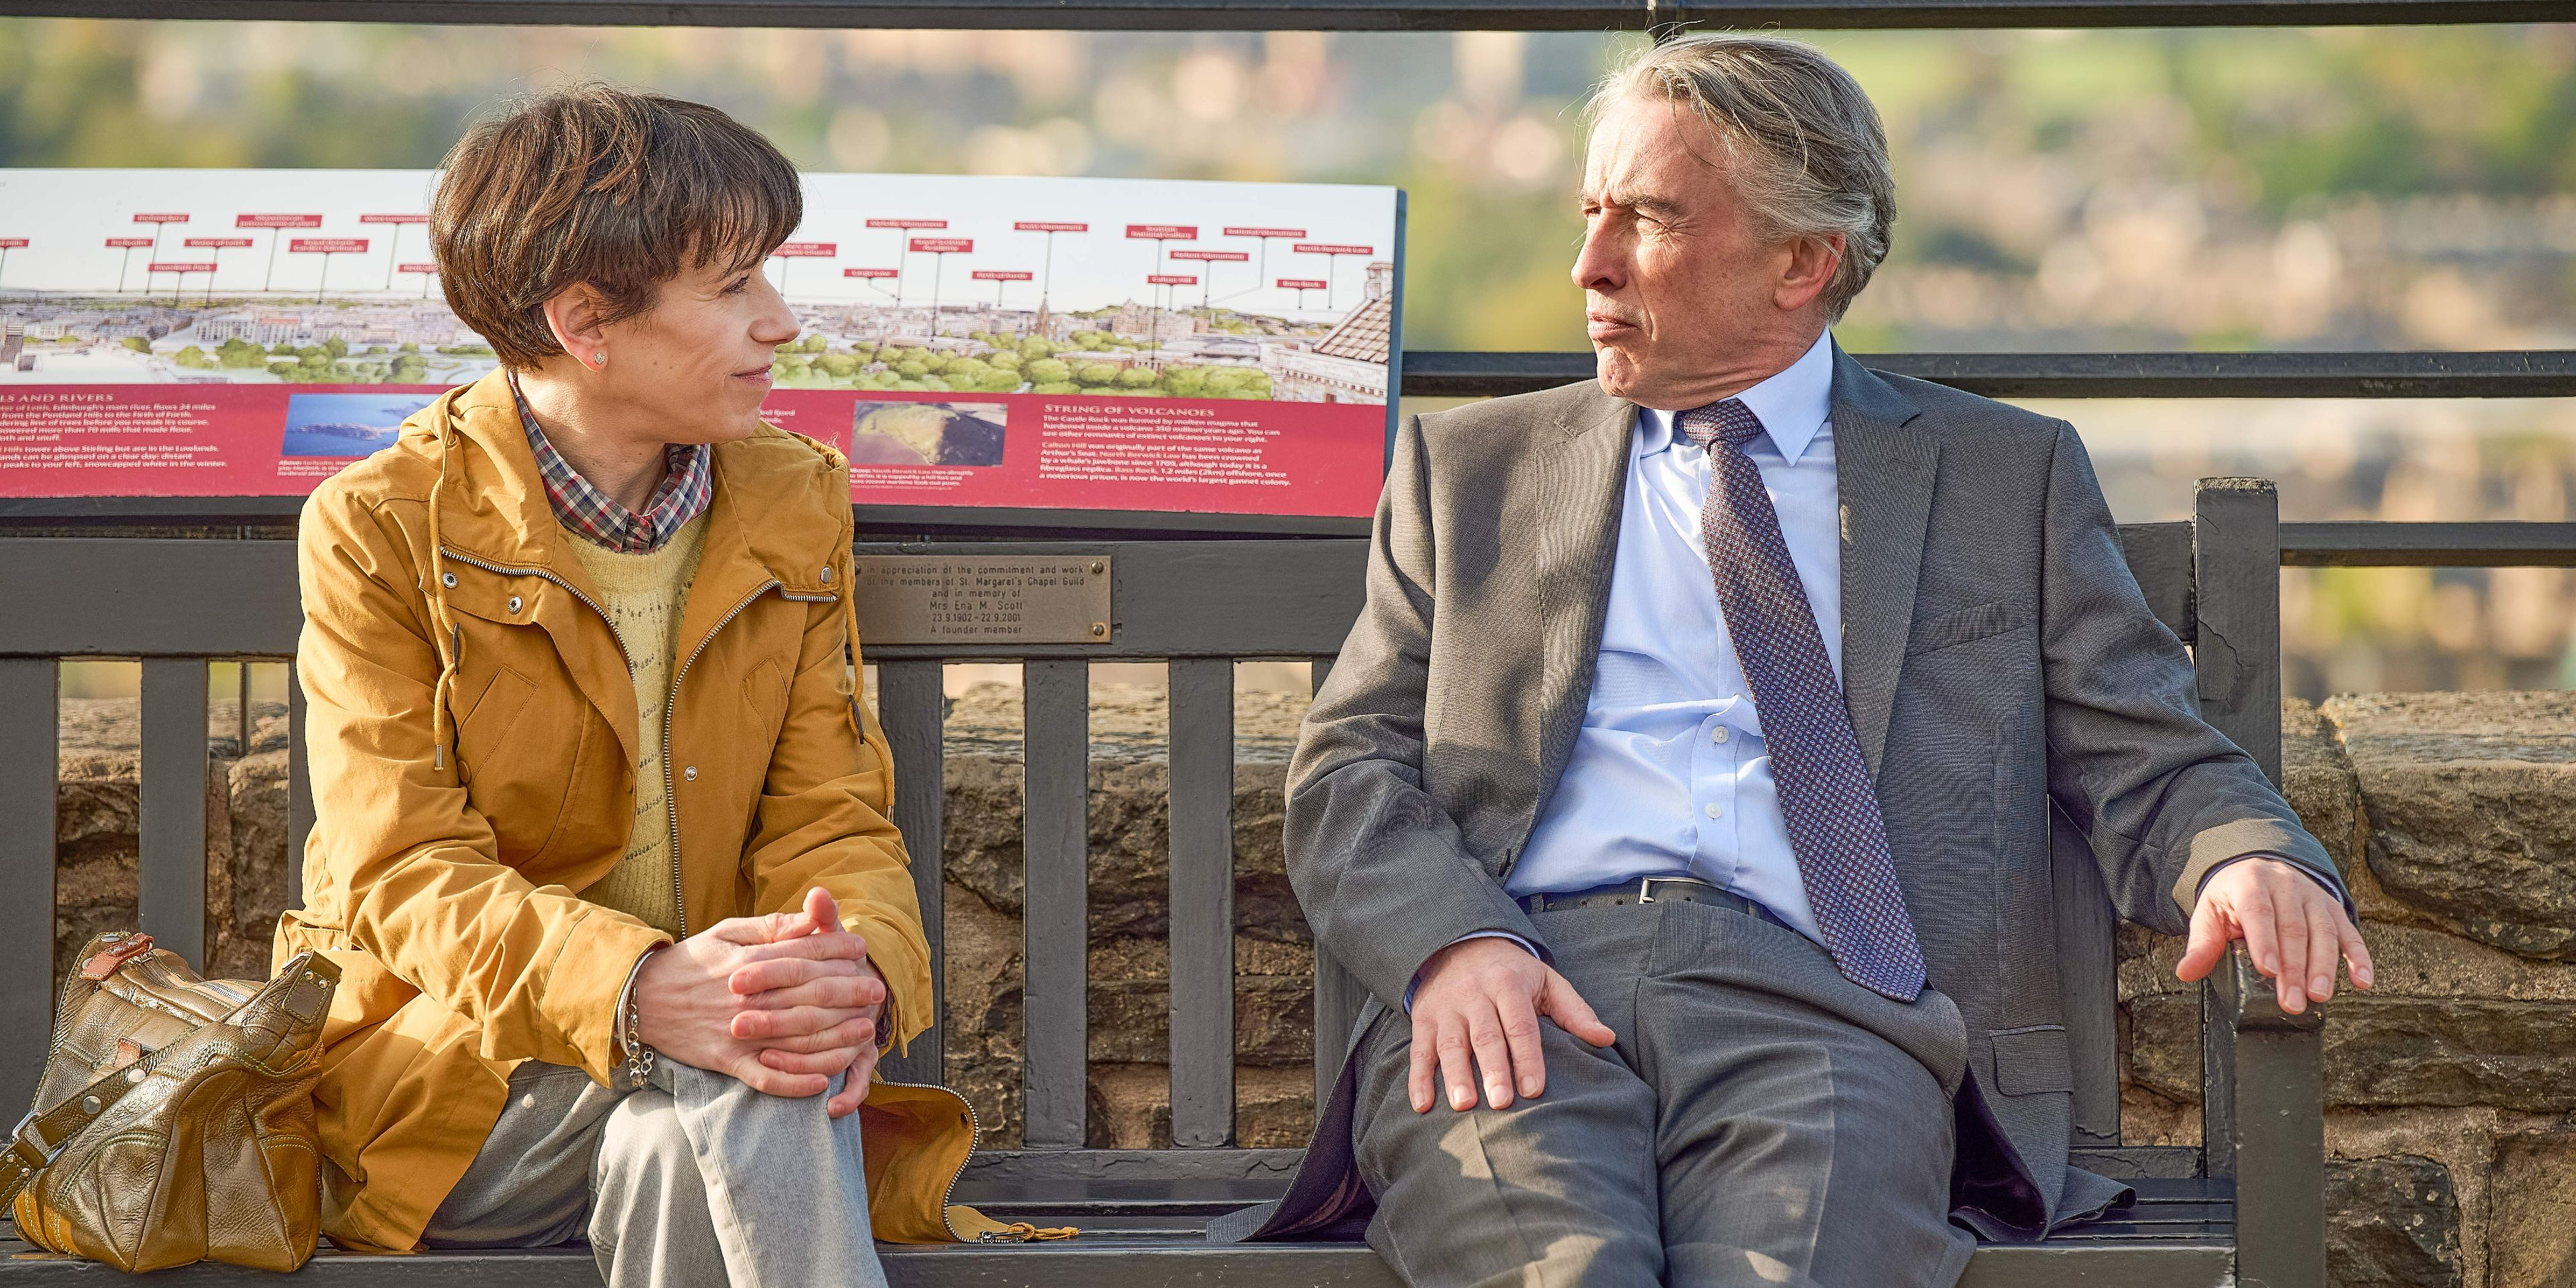 Sally Hawkins Can’t Save Boring Biopic With Misplaced Focus